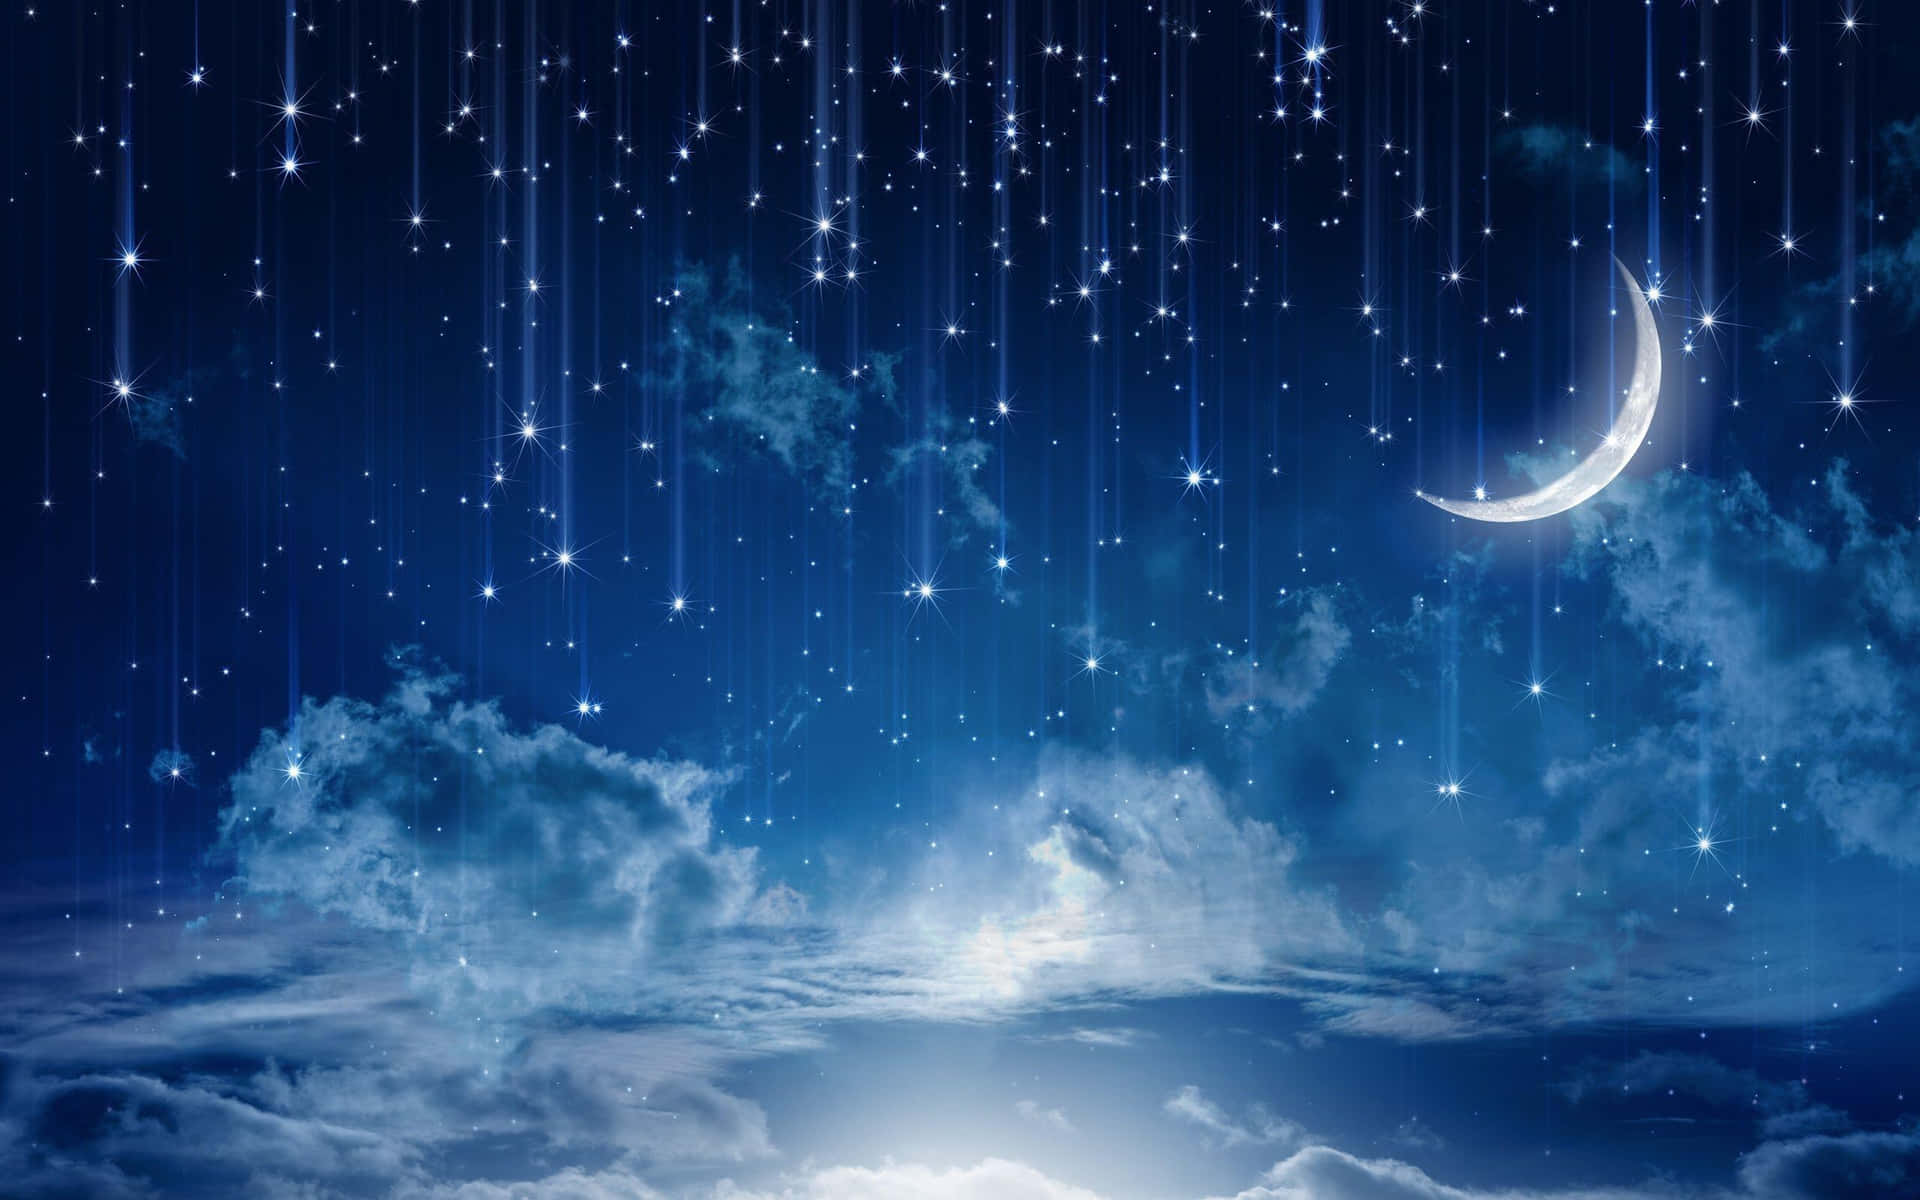 Feel the magic of the night with the beautiful Cute Moon Wallpaper